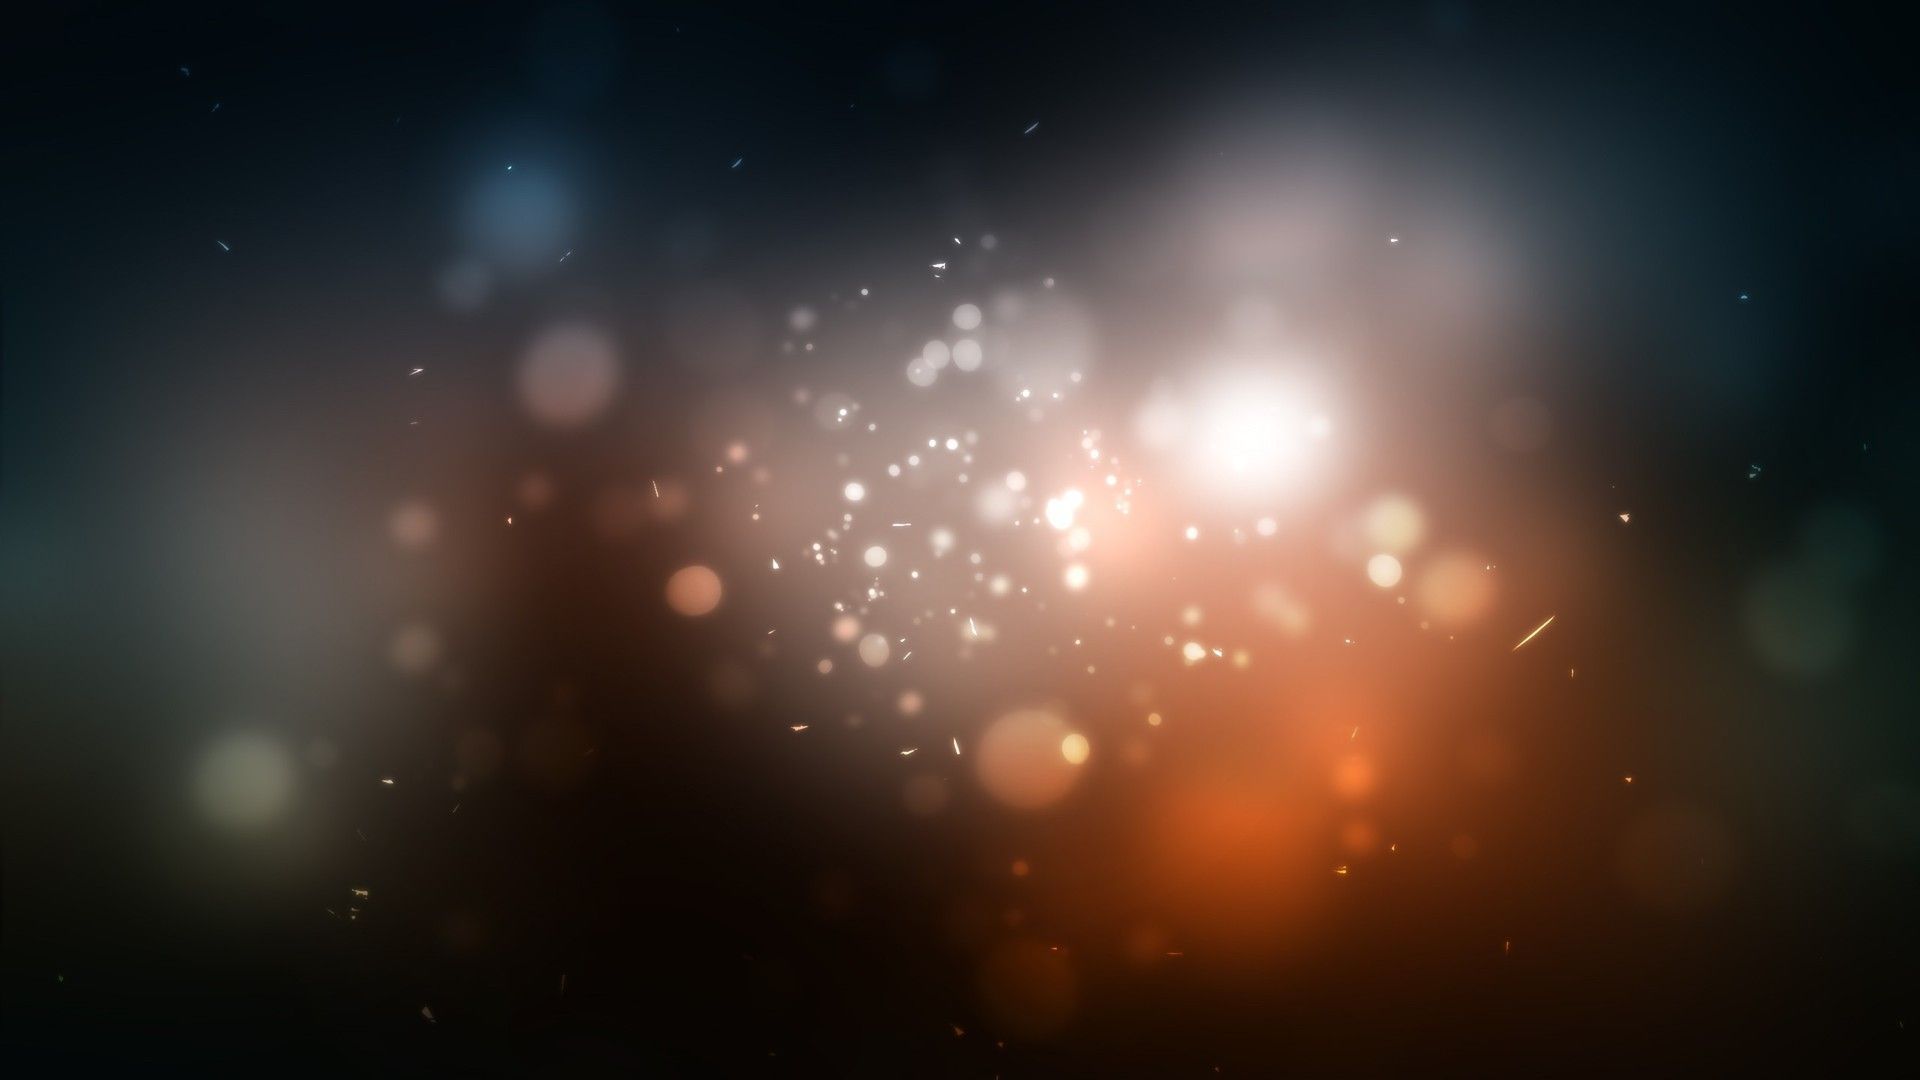 Blurred lights, 1920x1080 Wallpaper and Free Stock Photo